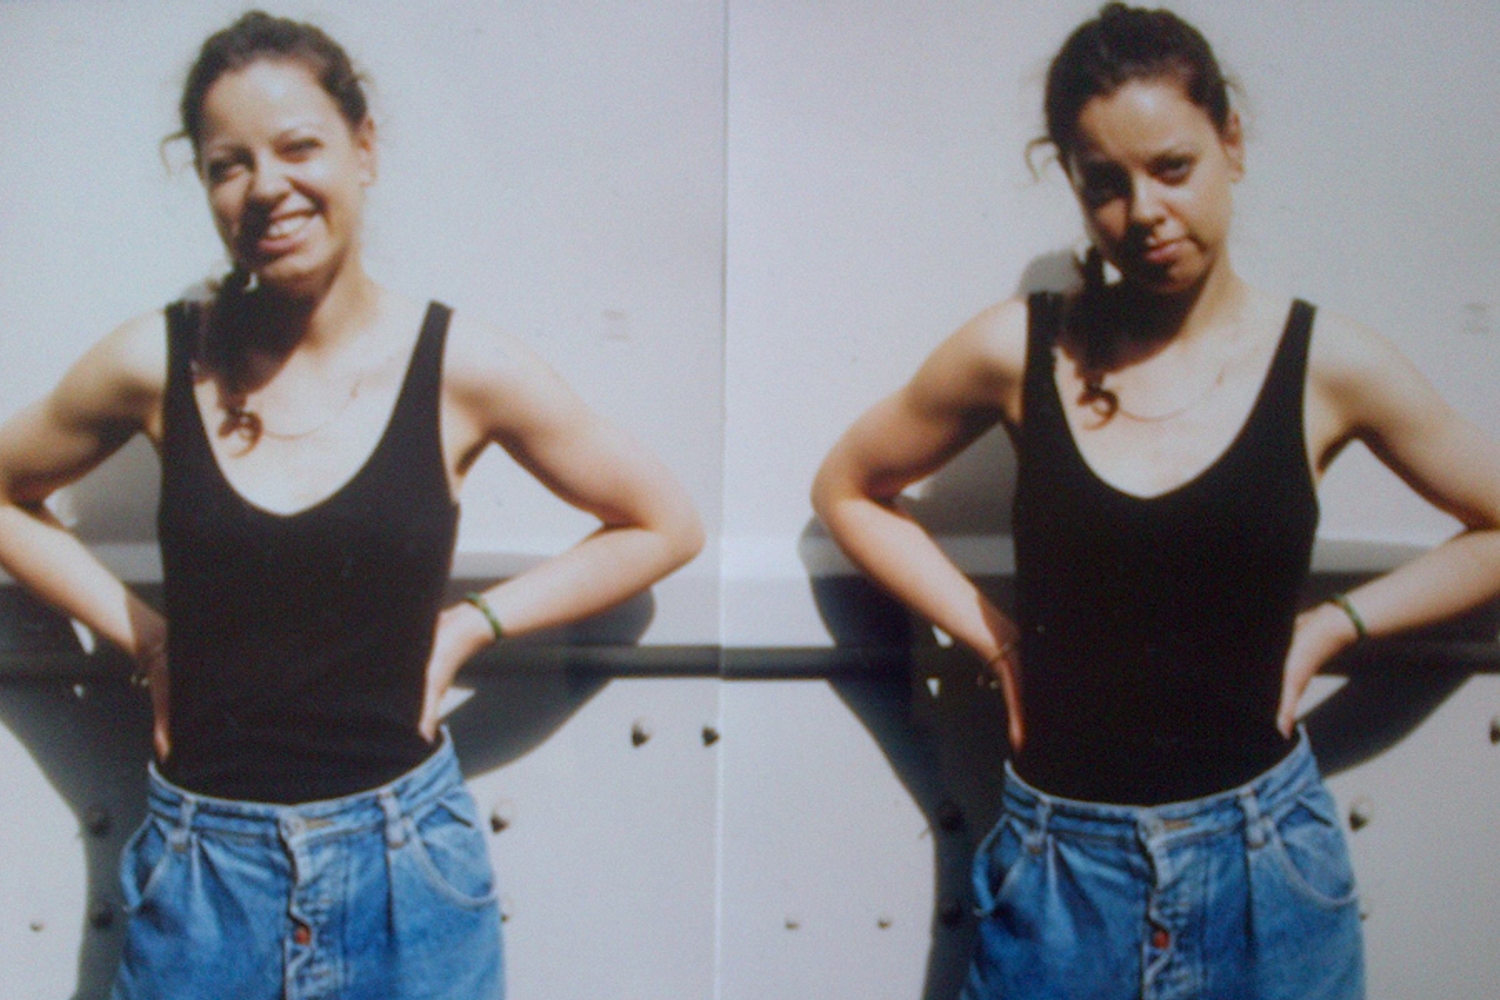 Tirzah shares new single ‘Make It Up’